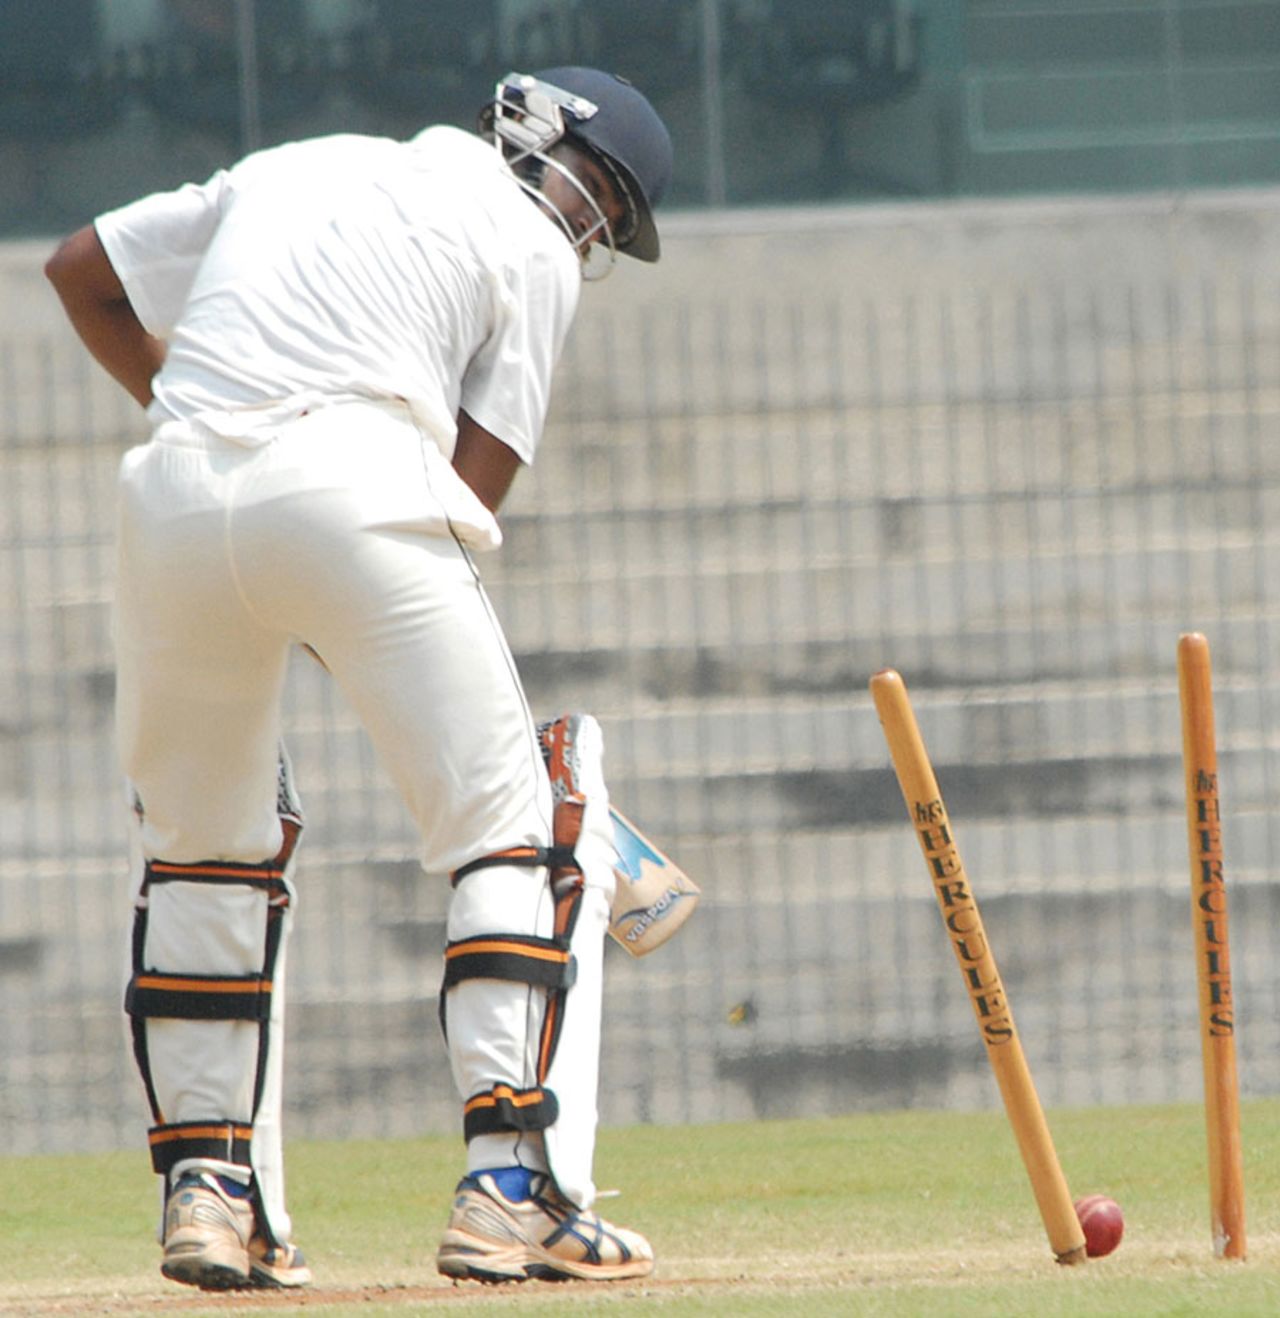 Murtuja Vahora loses his middle stump to Rishi Dhawan, North Zone v West Zone, quarter-final, Duleep Trophy, 3rd day, Chennai, October 8, 2012